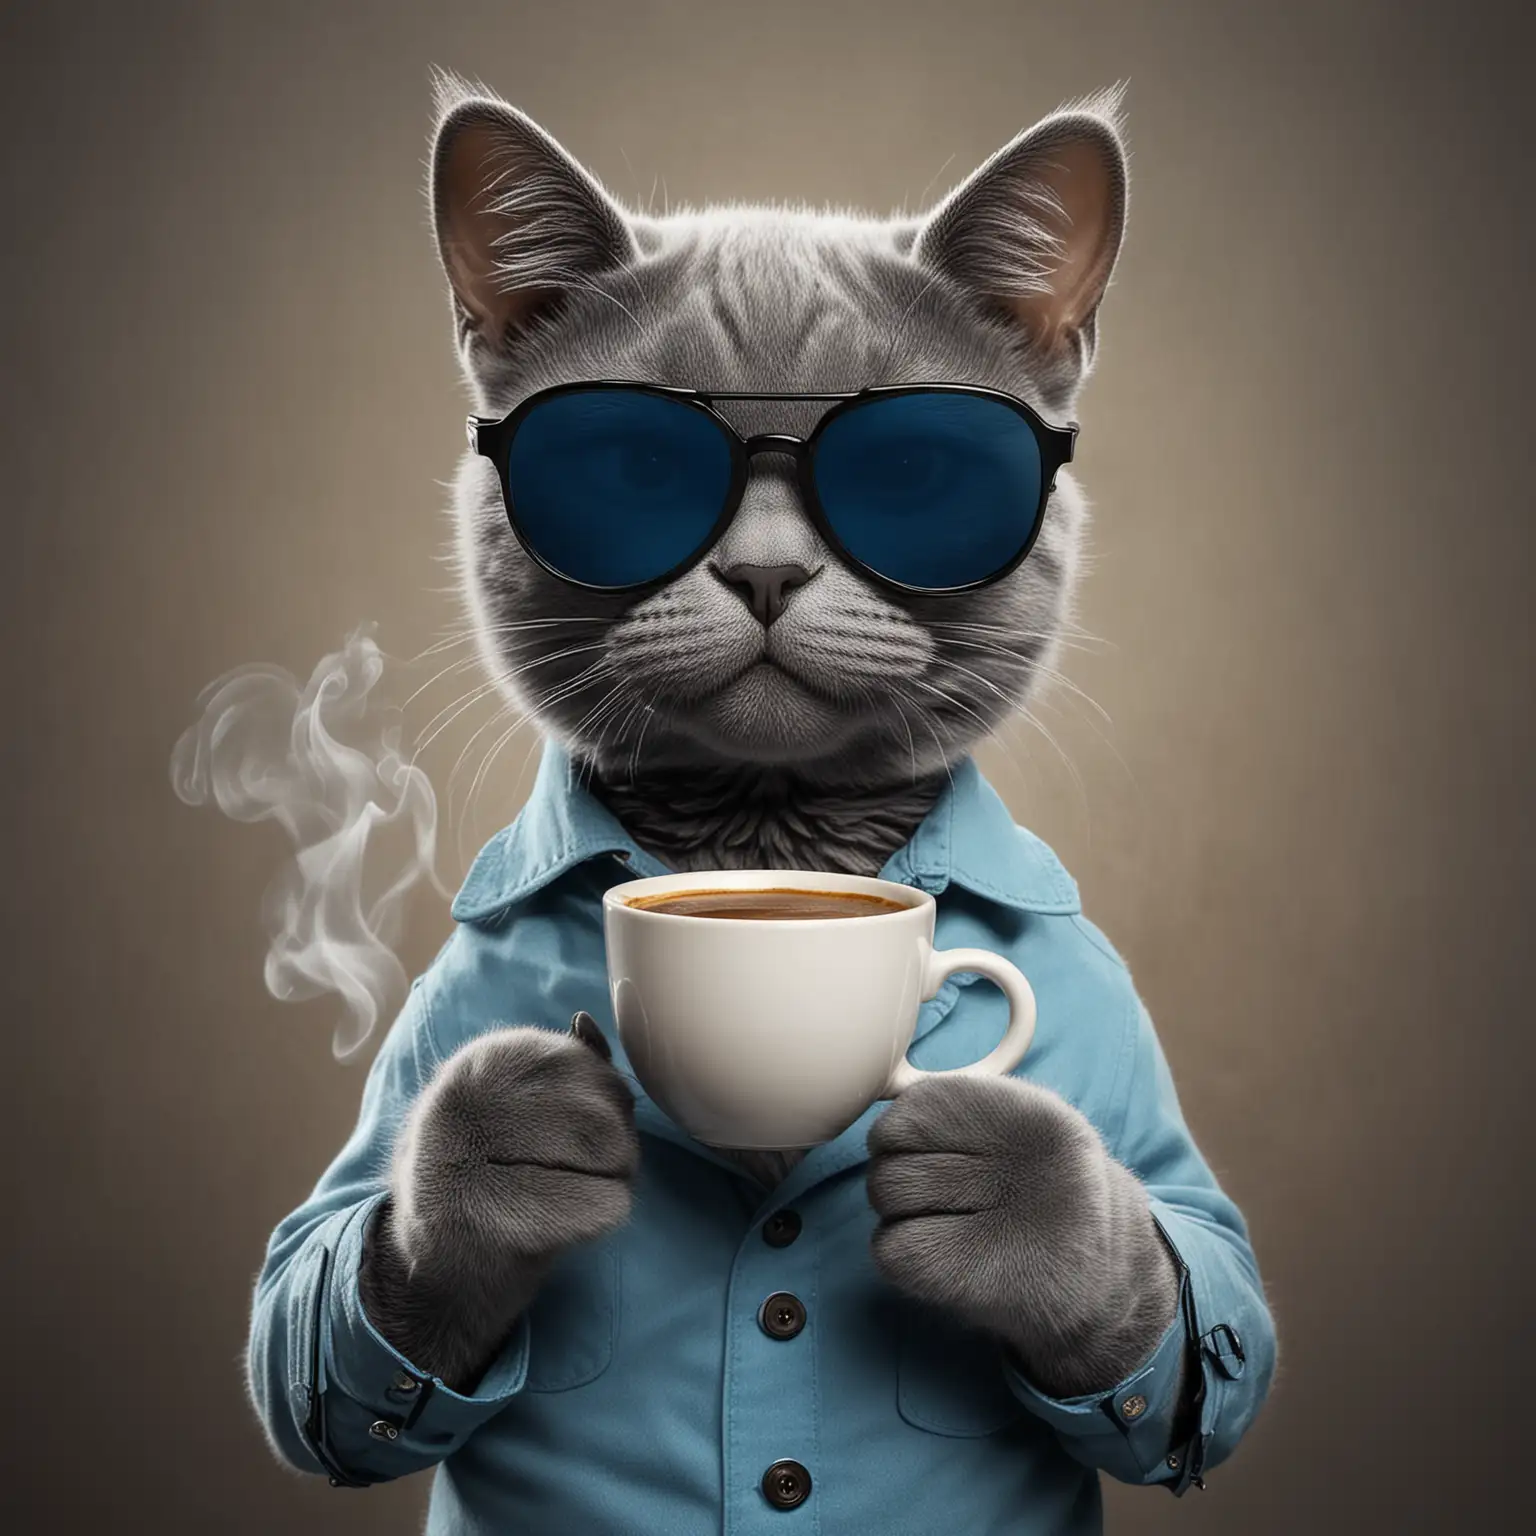 Blue cat with black aviator sunglasses and a steaming cup of coffee in his hand, true to style